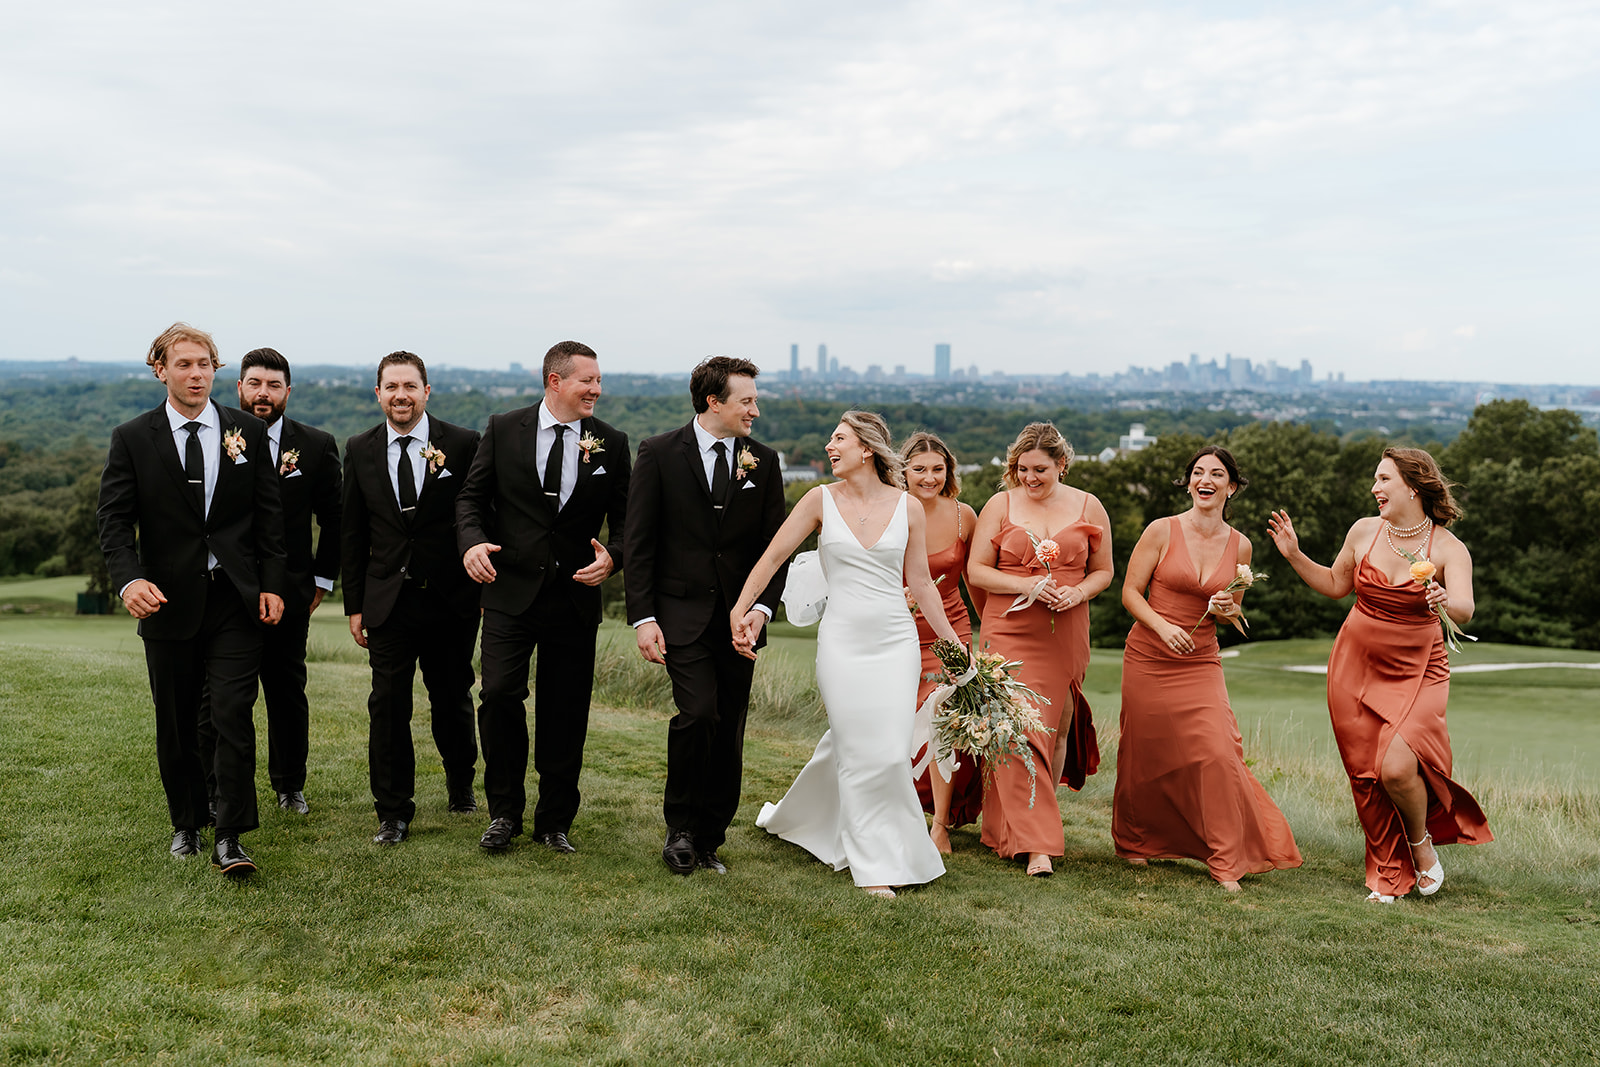 Wedding party celebrating against Boston skyline. Bridesmaids and groomsmen buzzing with excitement and joy.